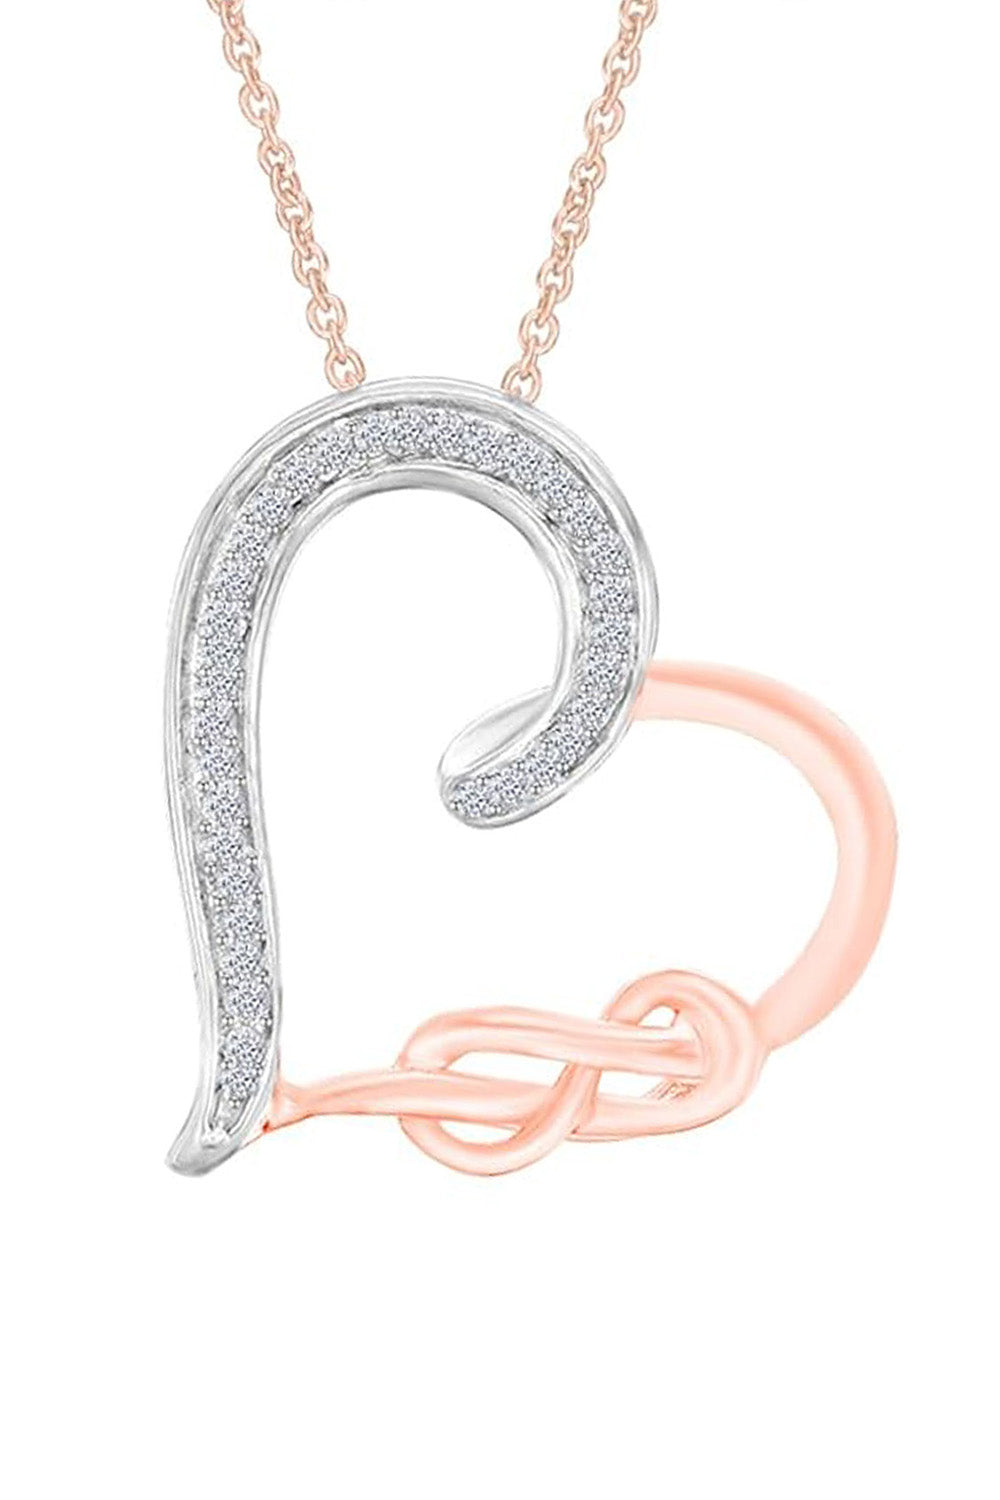  Rose Gold Color Infinity Knot Heart Pendant Necklace